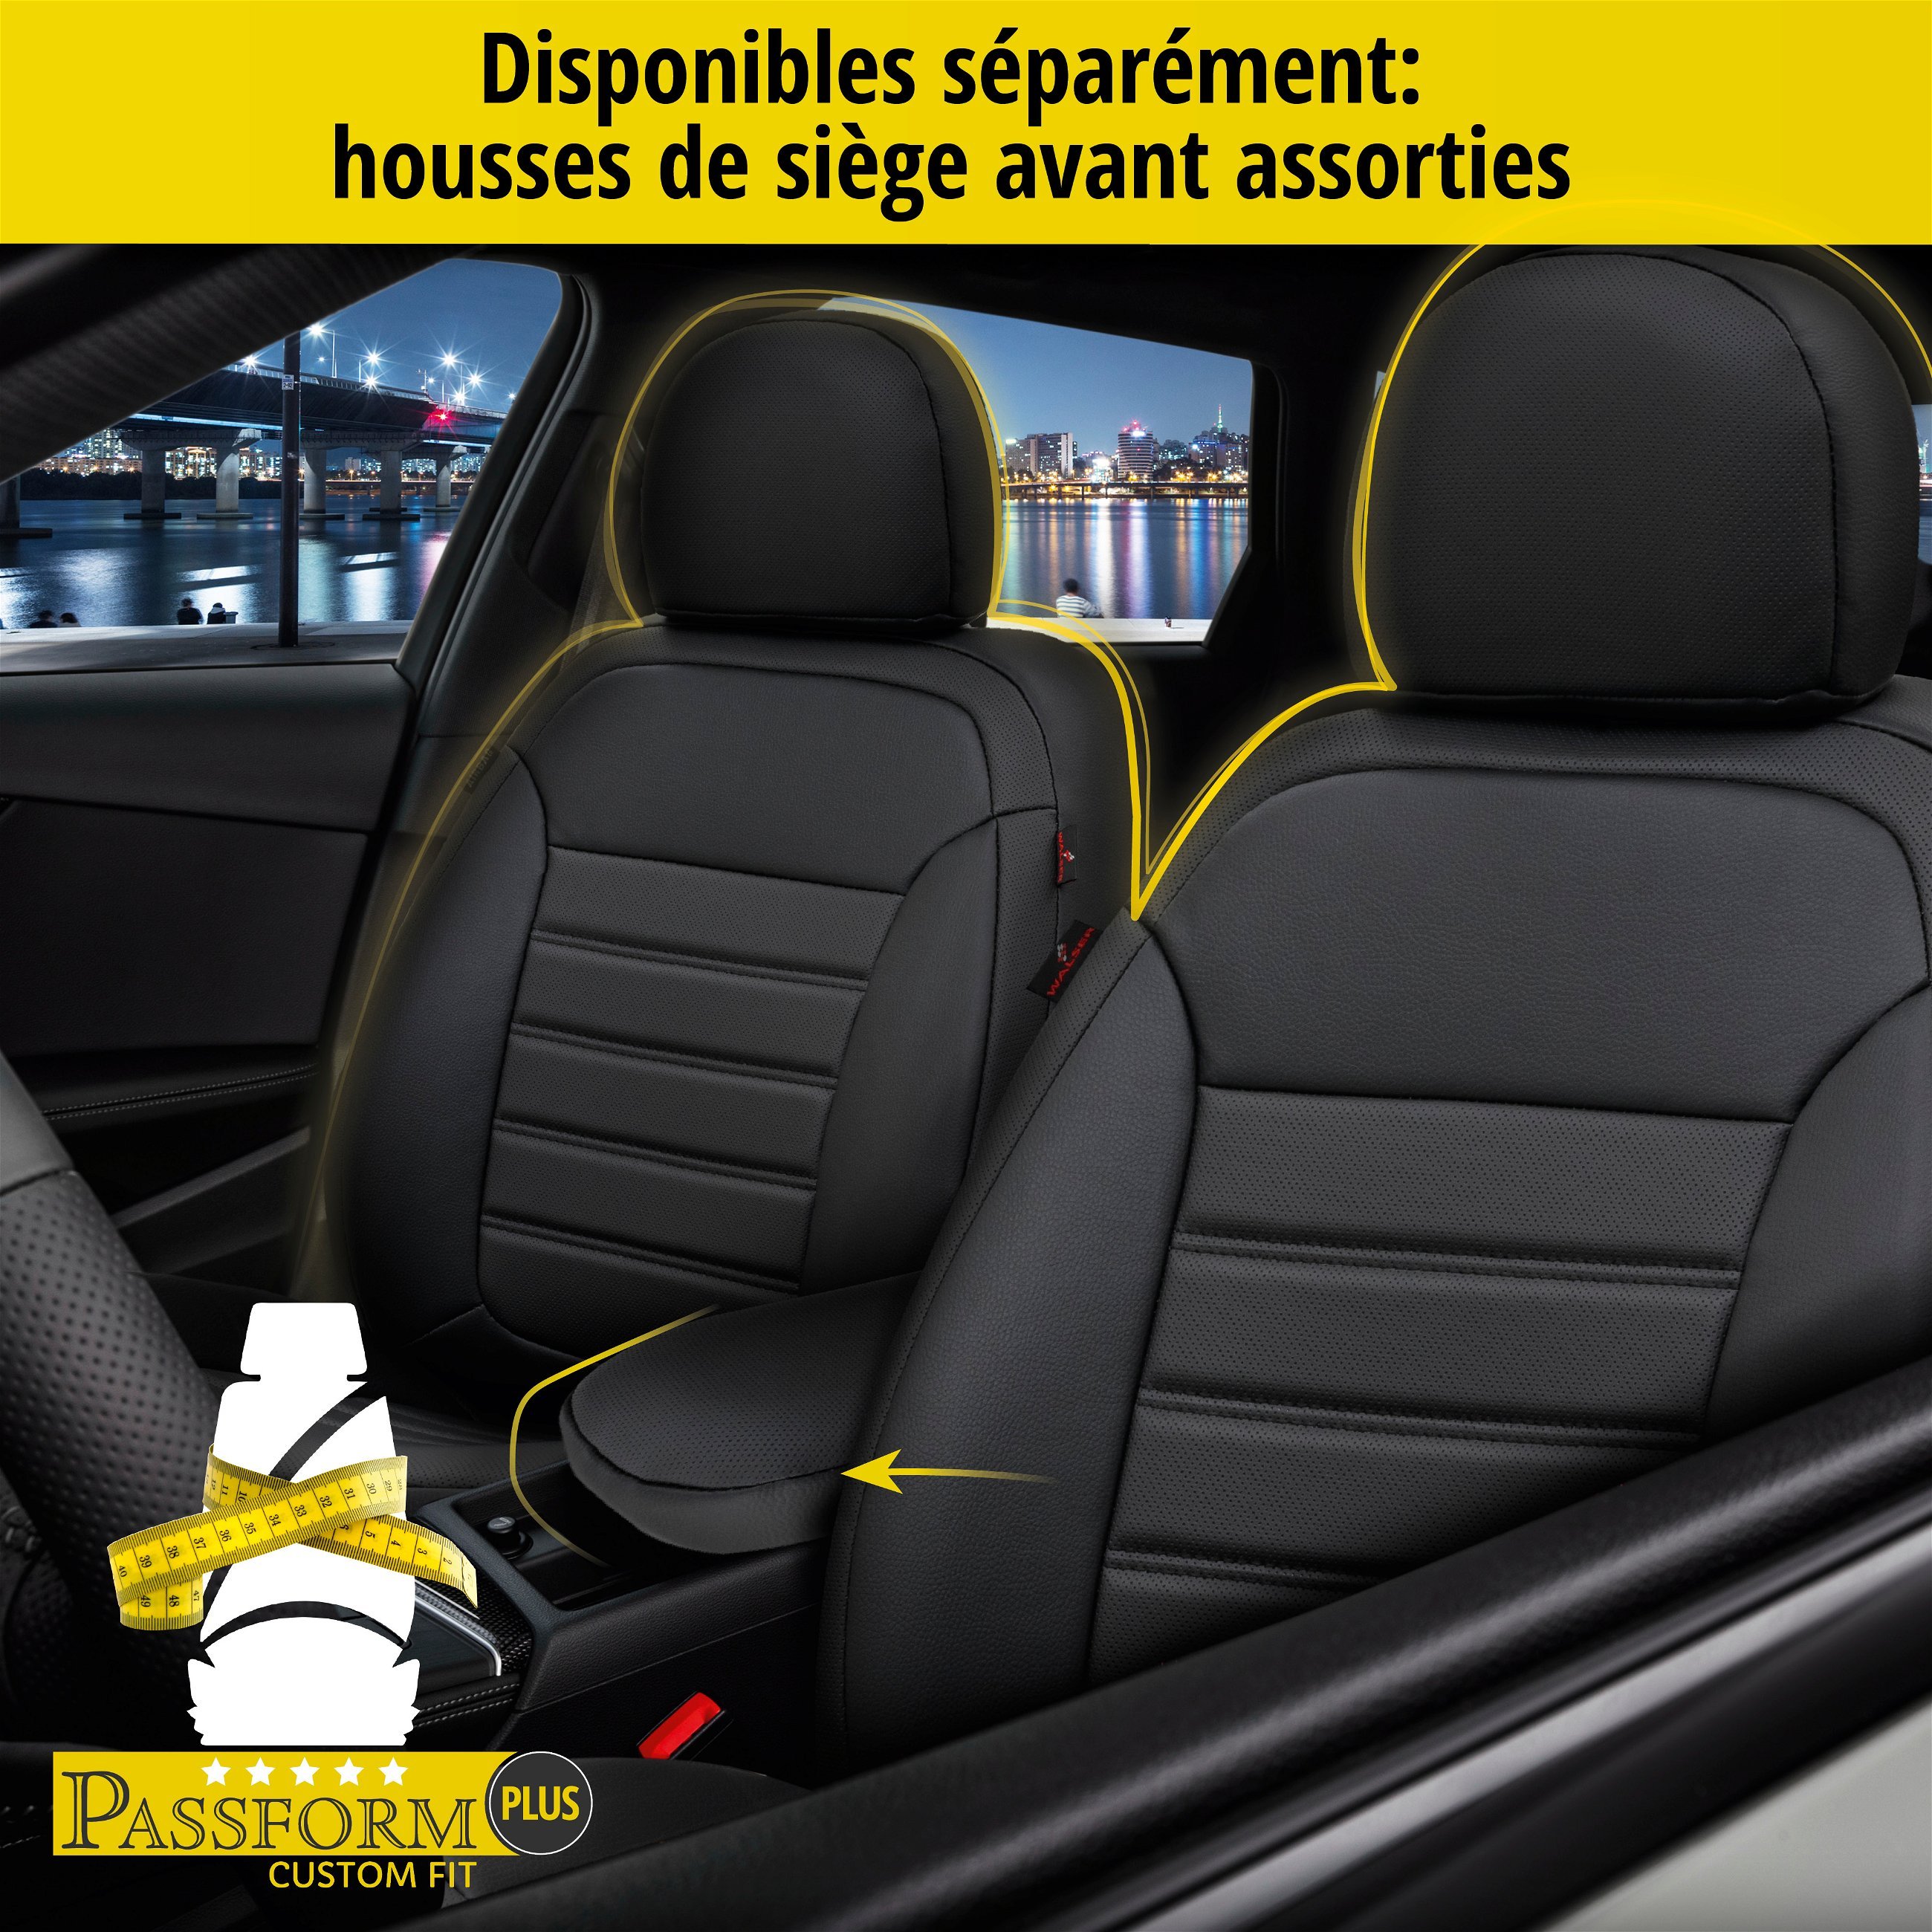 Housse de siège Robusto pour Opel Astra J Caravan (P10) 10/2010-10/2015, 1 housse de siège arrière pour les sièges normaux